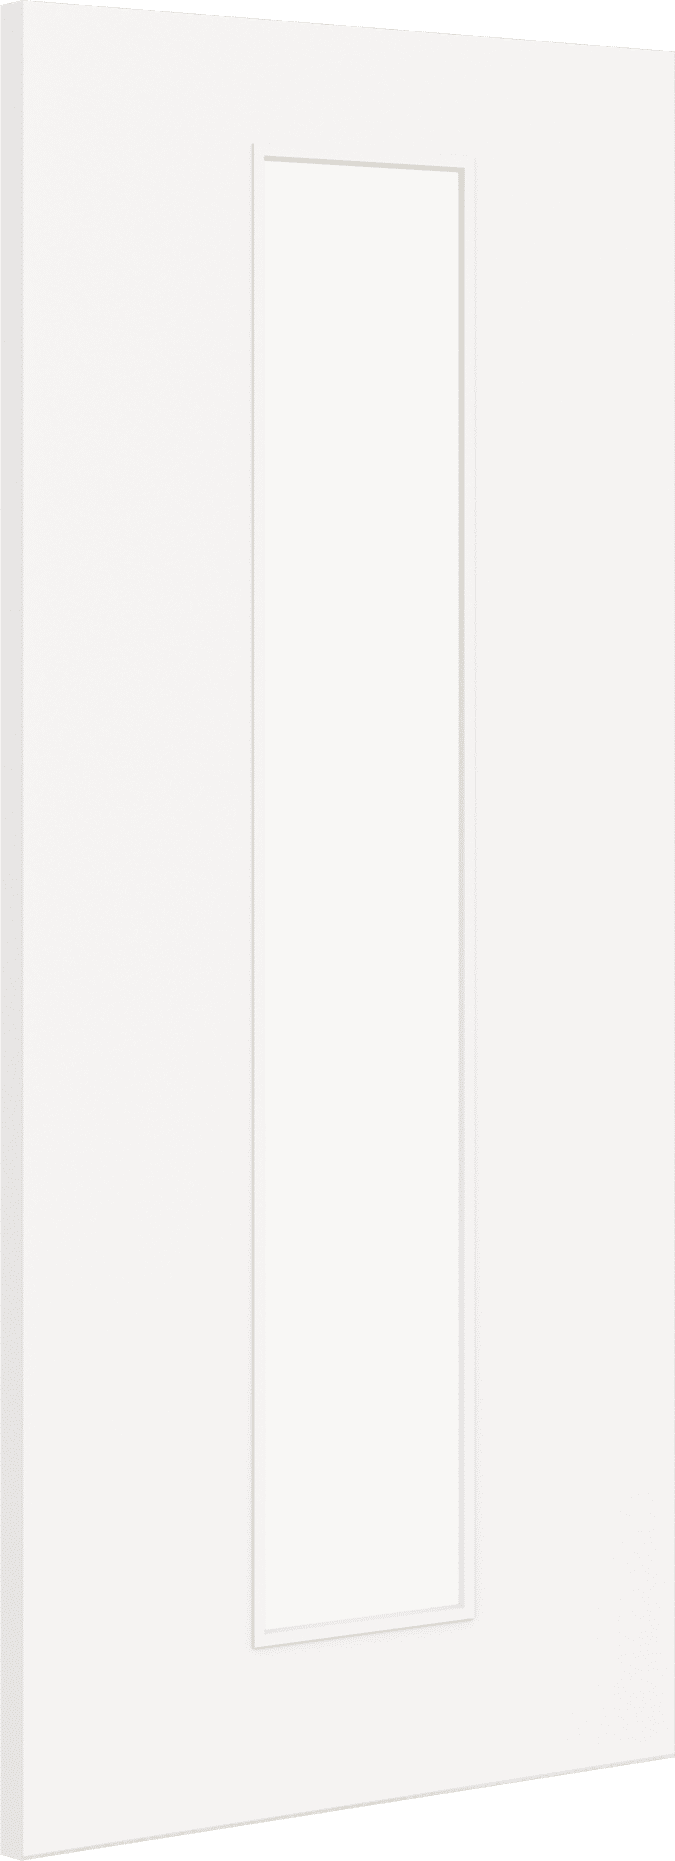 2040mm x 926mm x 44mm Architectural Paint Grade White 10 Frosted Glazed Fire Door Blank